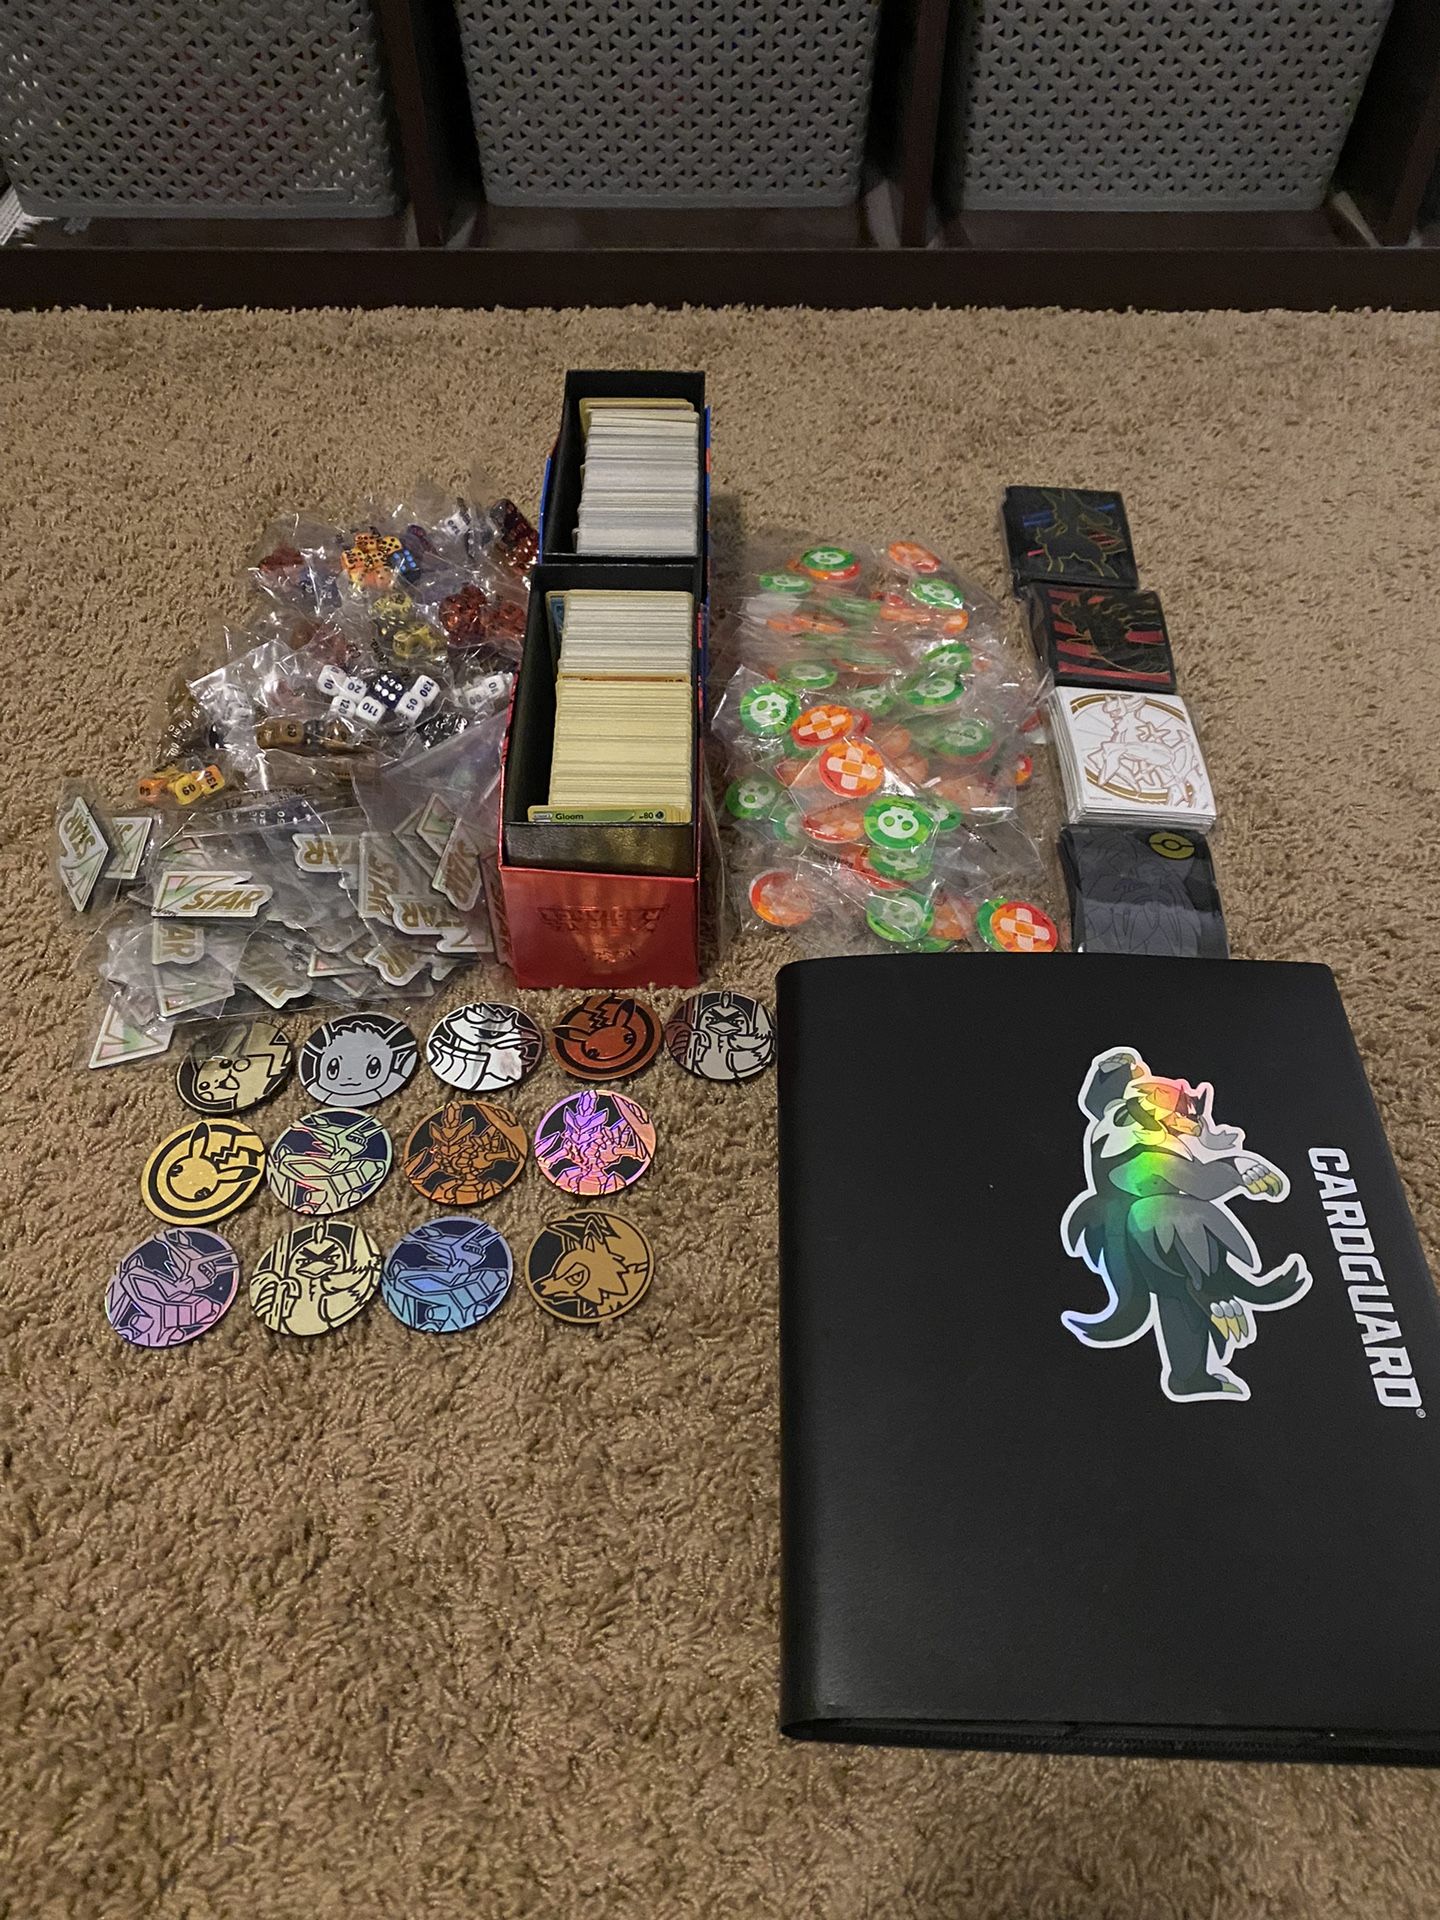 Pokémon TCG Card Collection and accessories